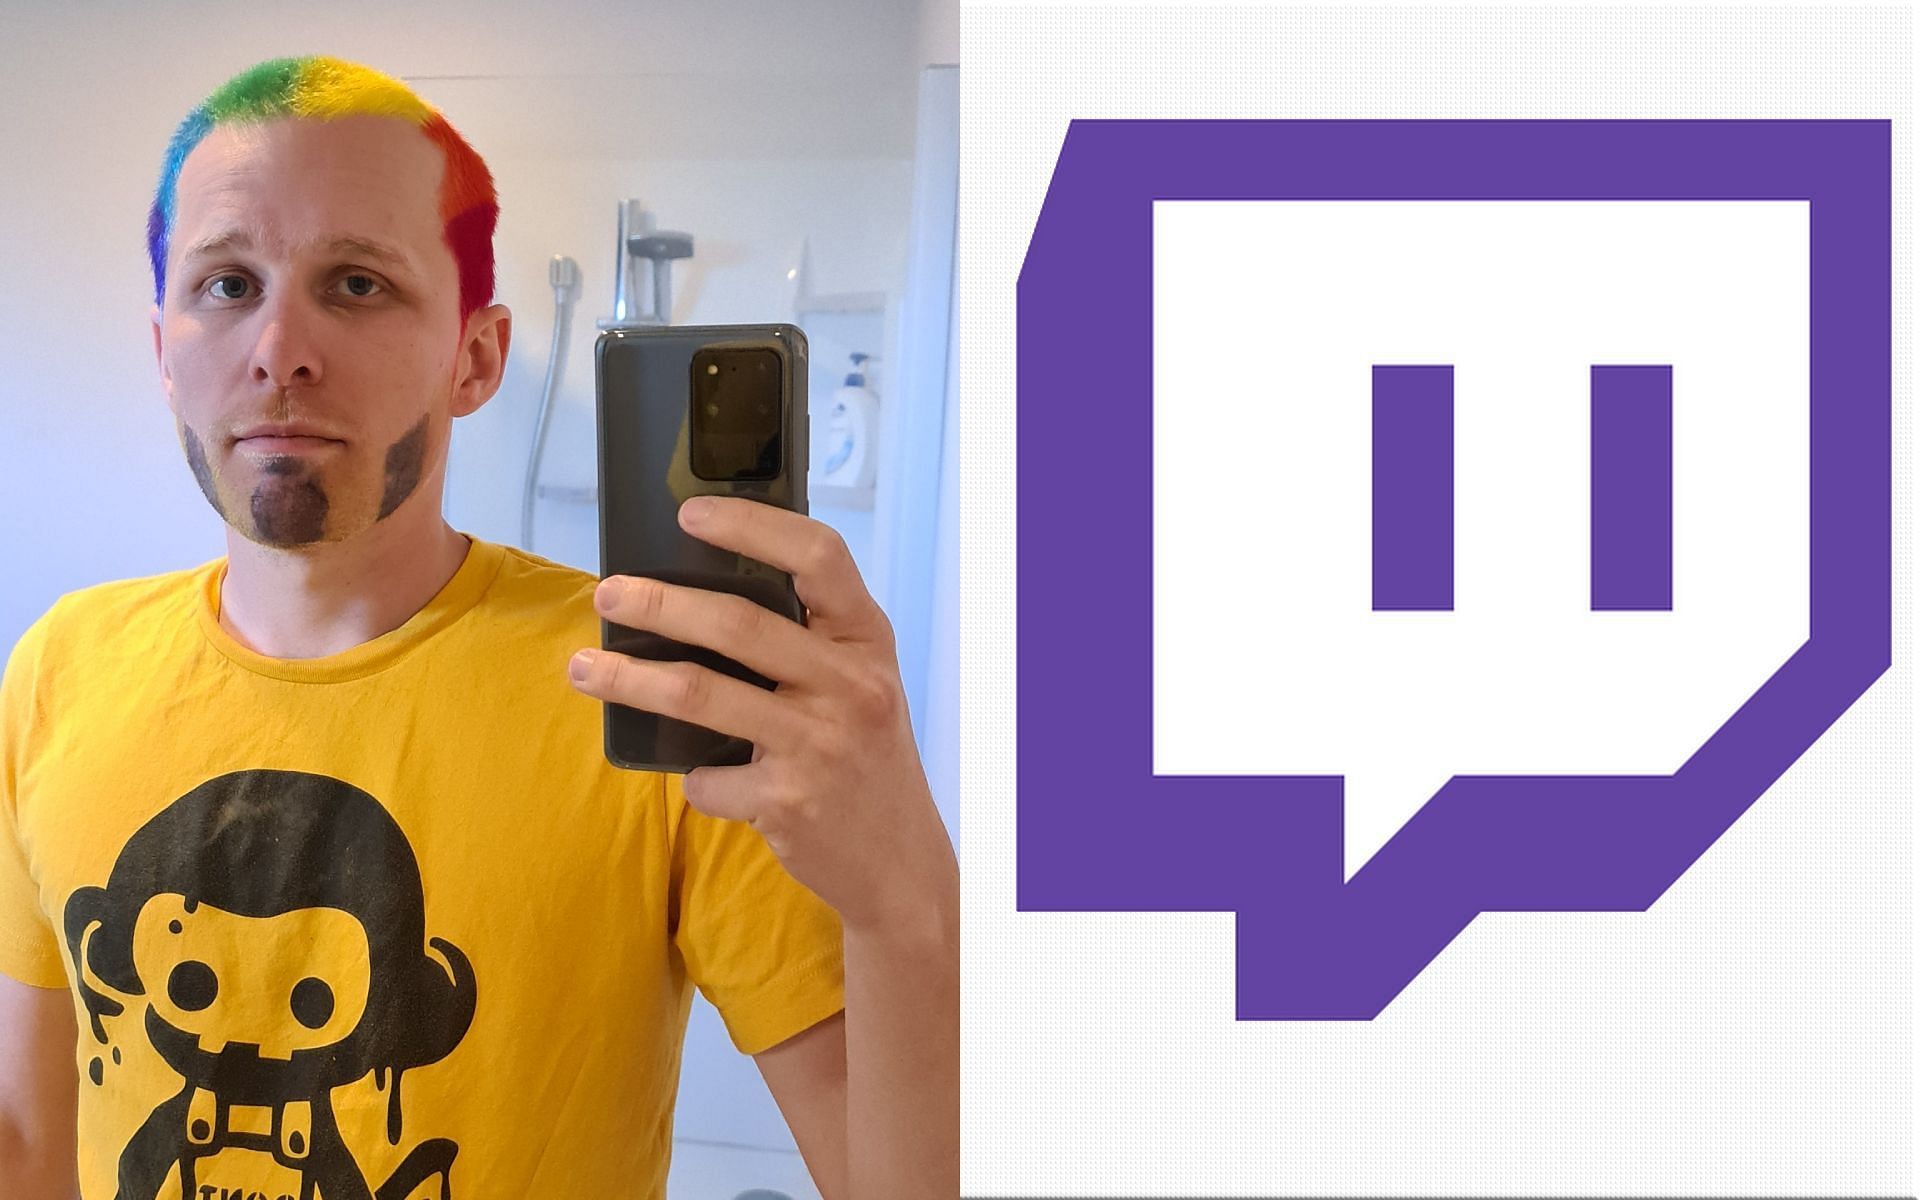 Twitch streamer Quin69 was banned from Twitch on April 23 (Image via Sportskeeda)